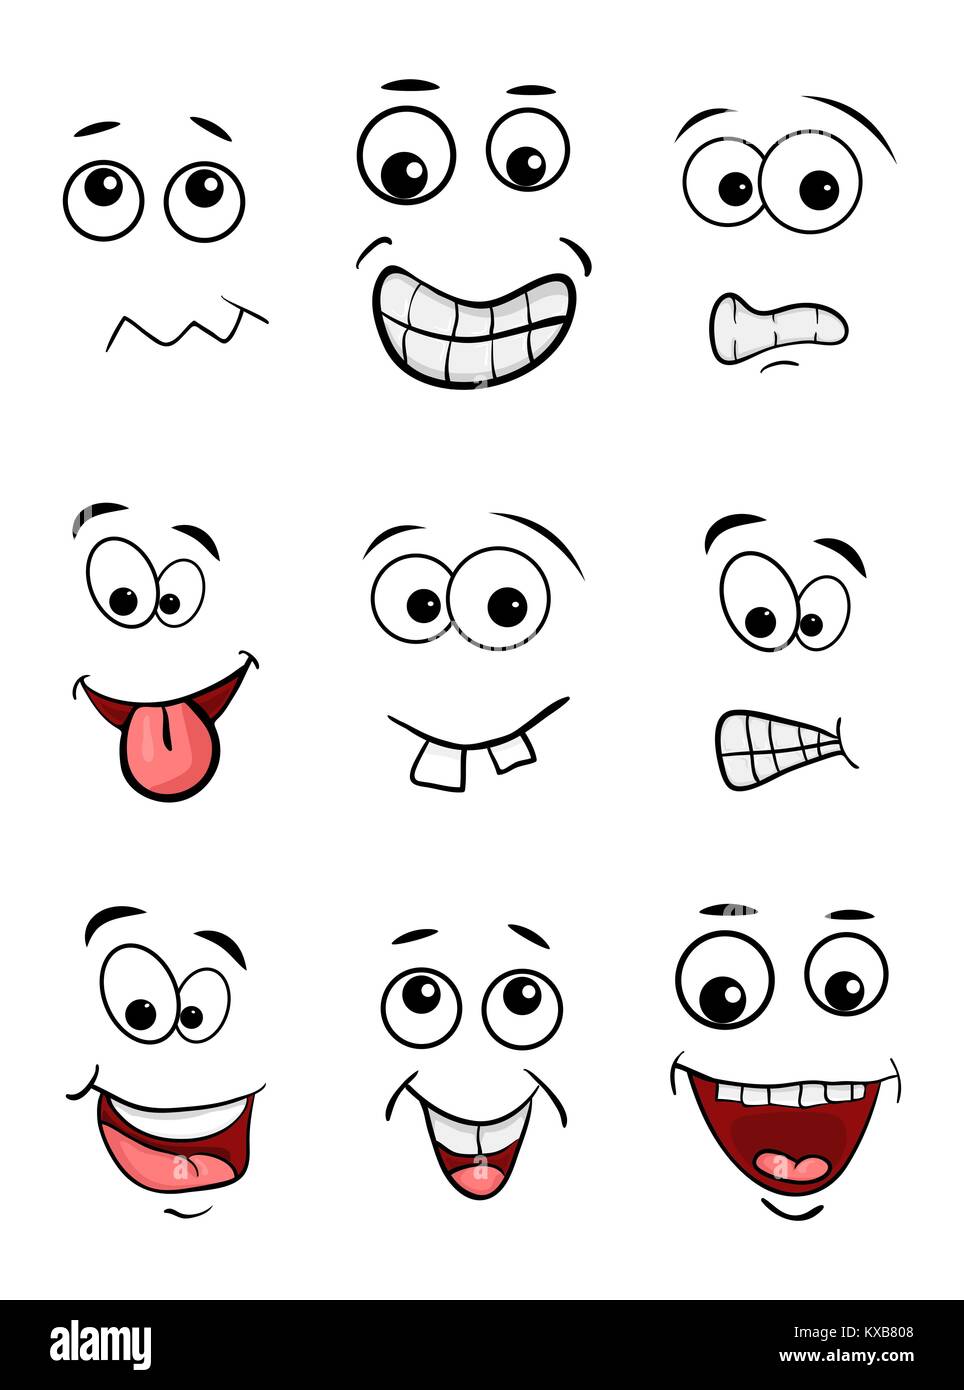 cartoon face set isolated on white background Stock Vector